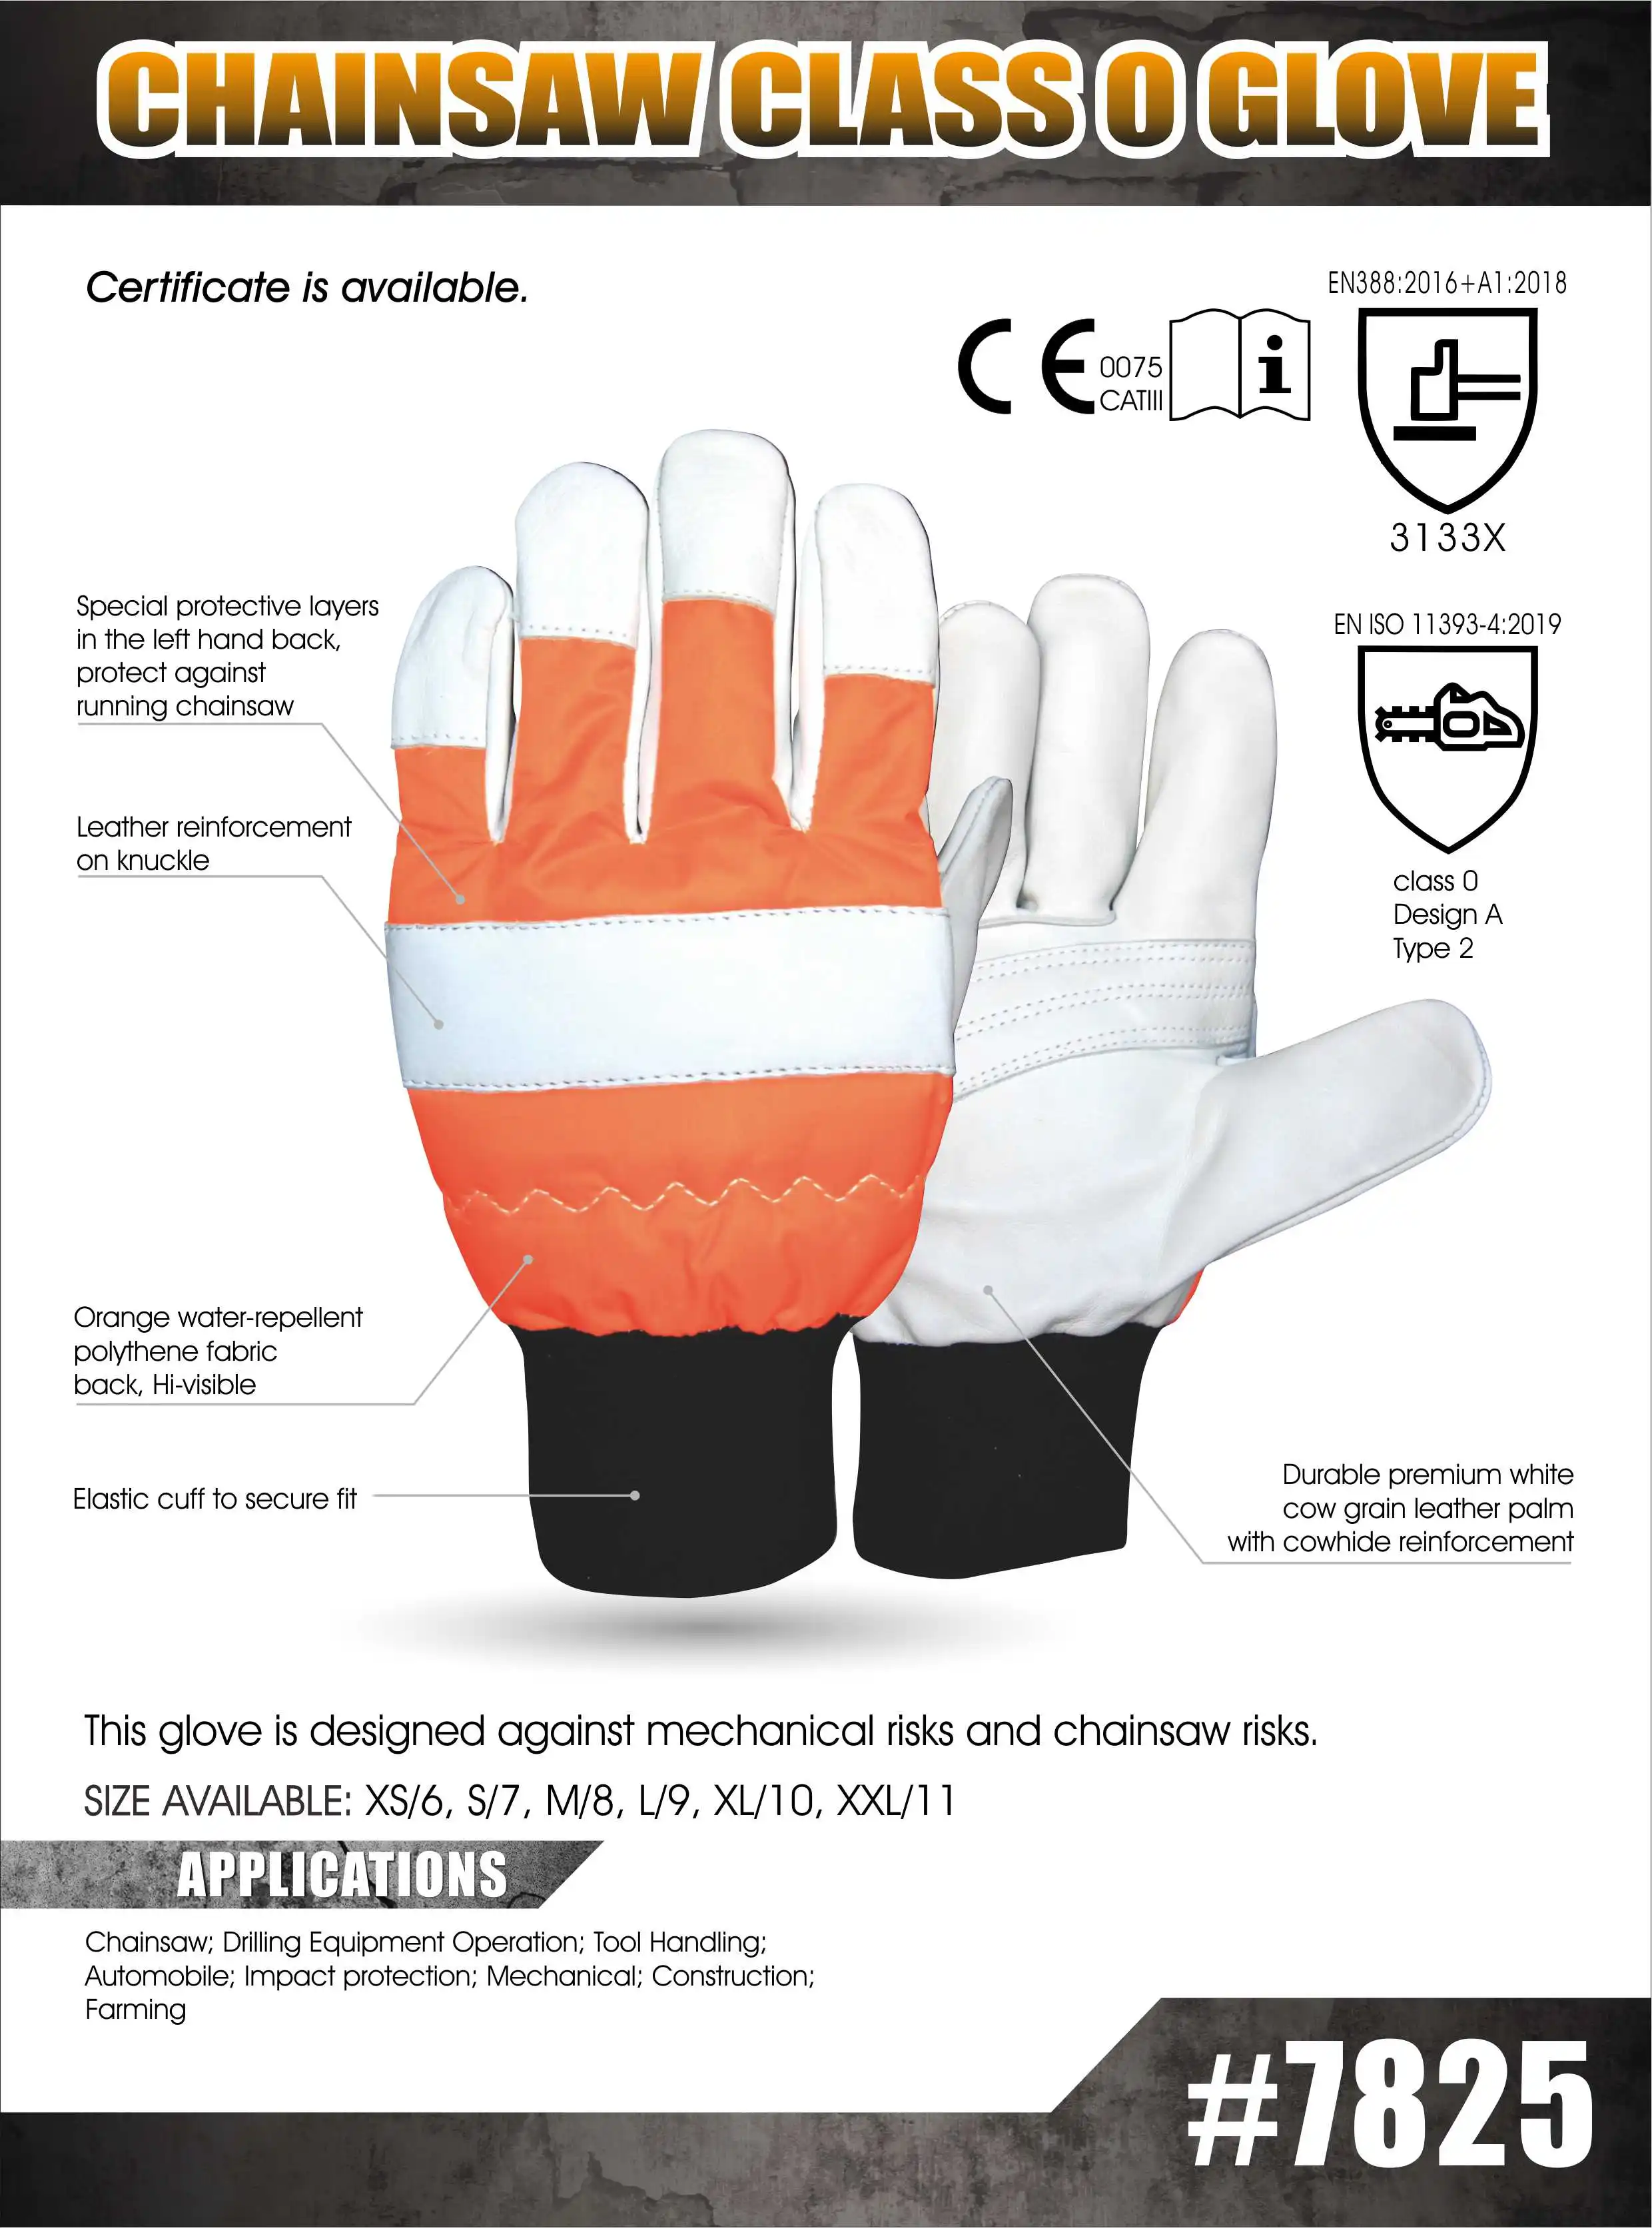 EN ISO 11393-4 2019 CLASS 0 Chainsaw Safety Gloves For Wood